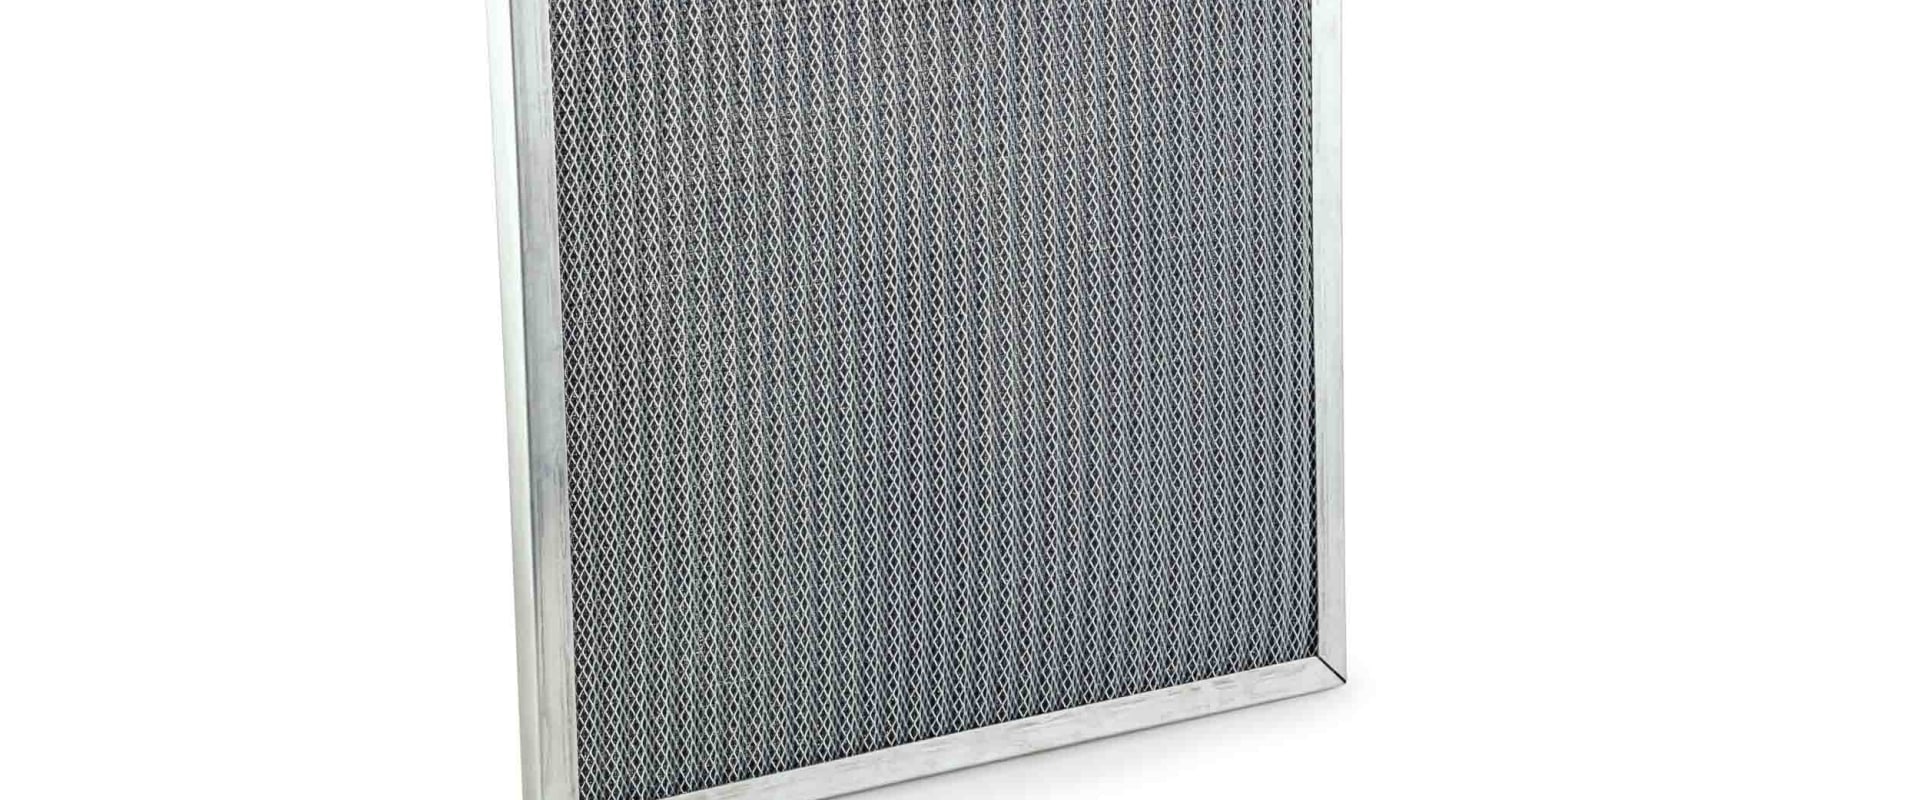 What Type of Environment is Best Suited for Electrostatic 14x18x1 Air Filters?